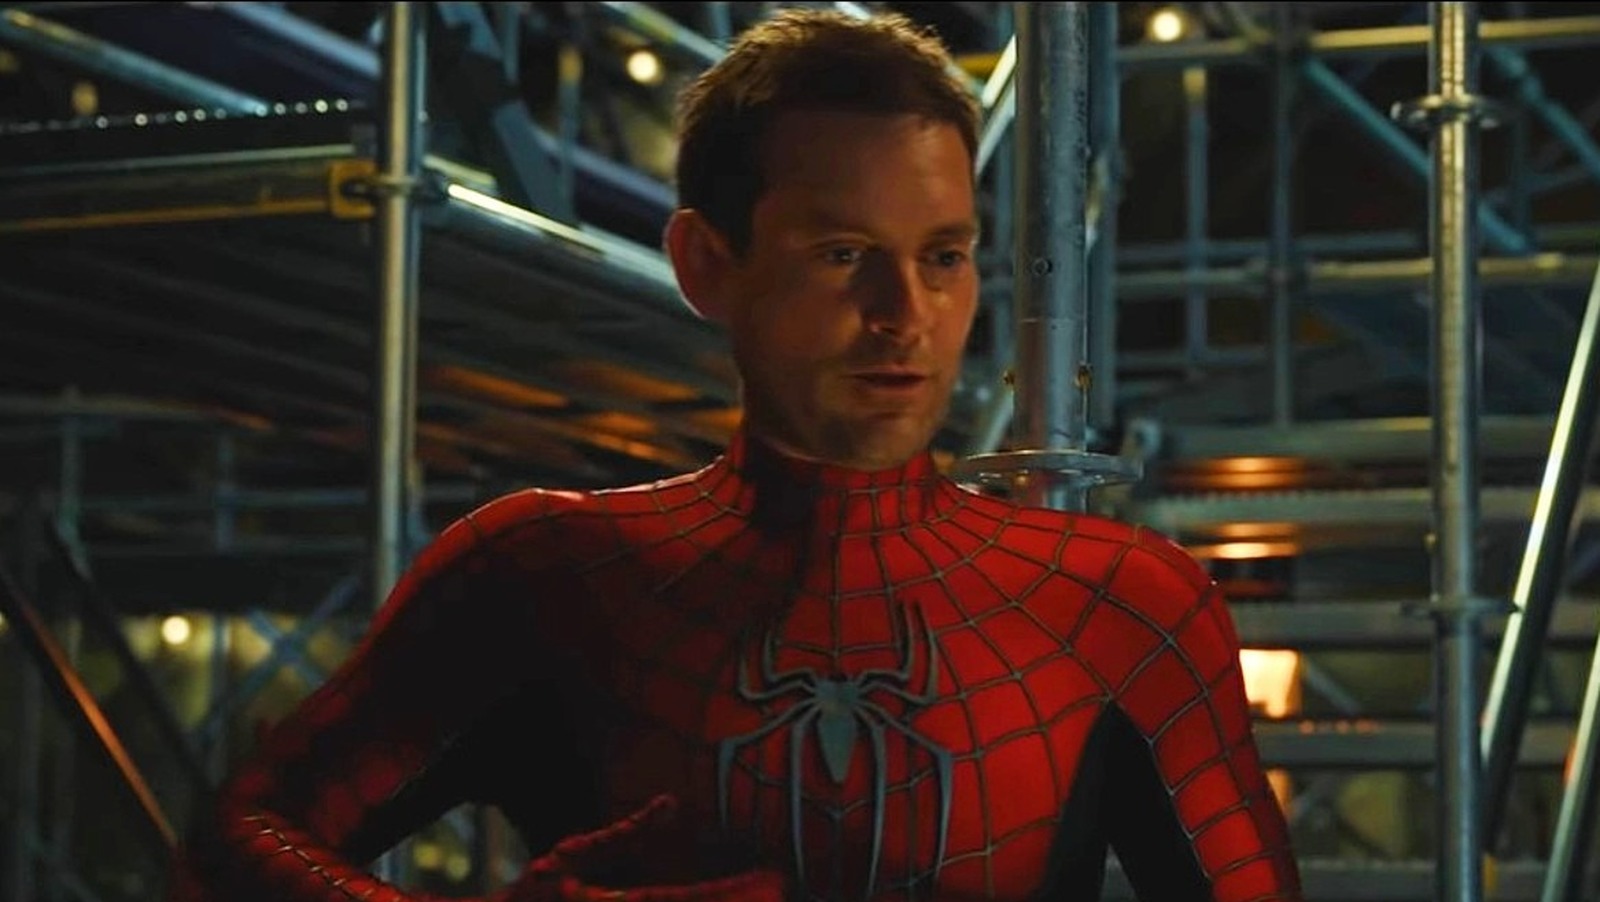 Tobey Maguire Talks About Working on SPIDER-MAN: NO WAY HOME and